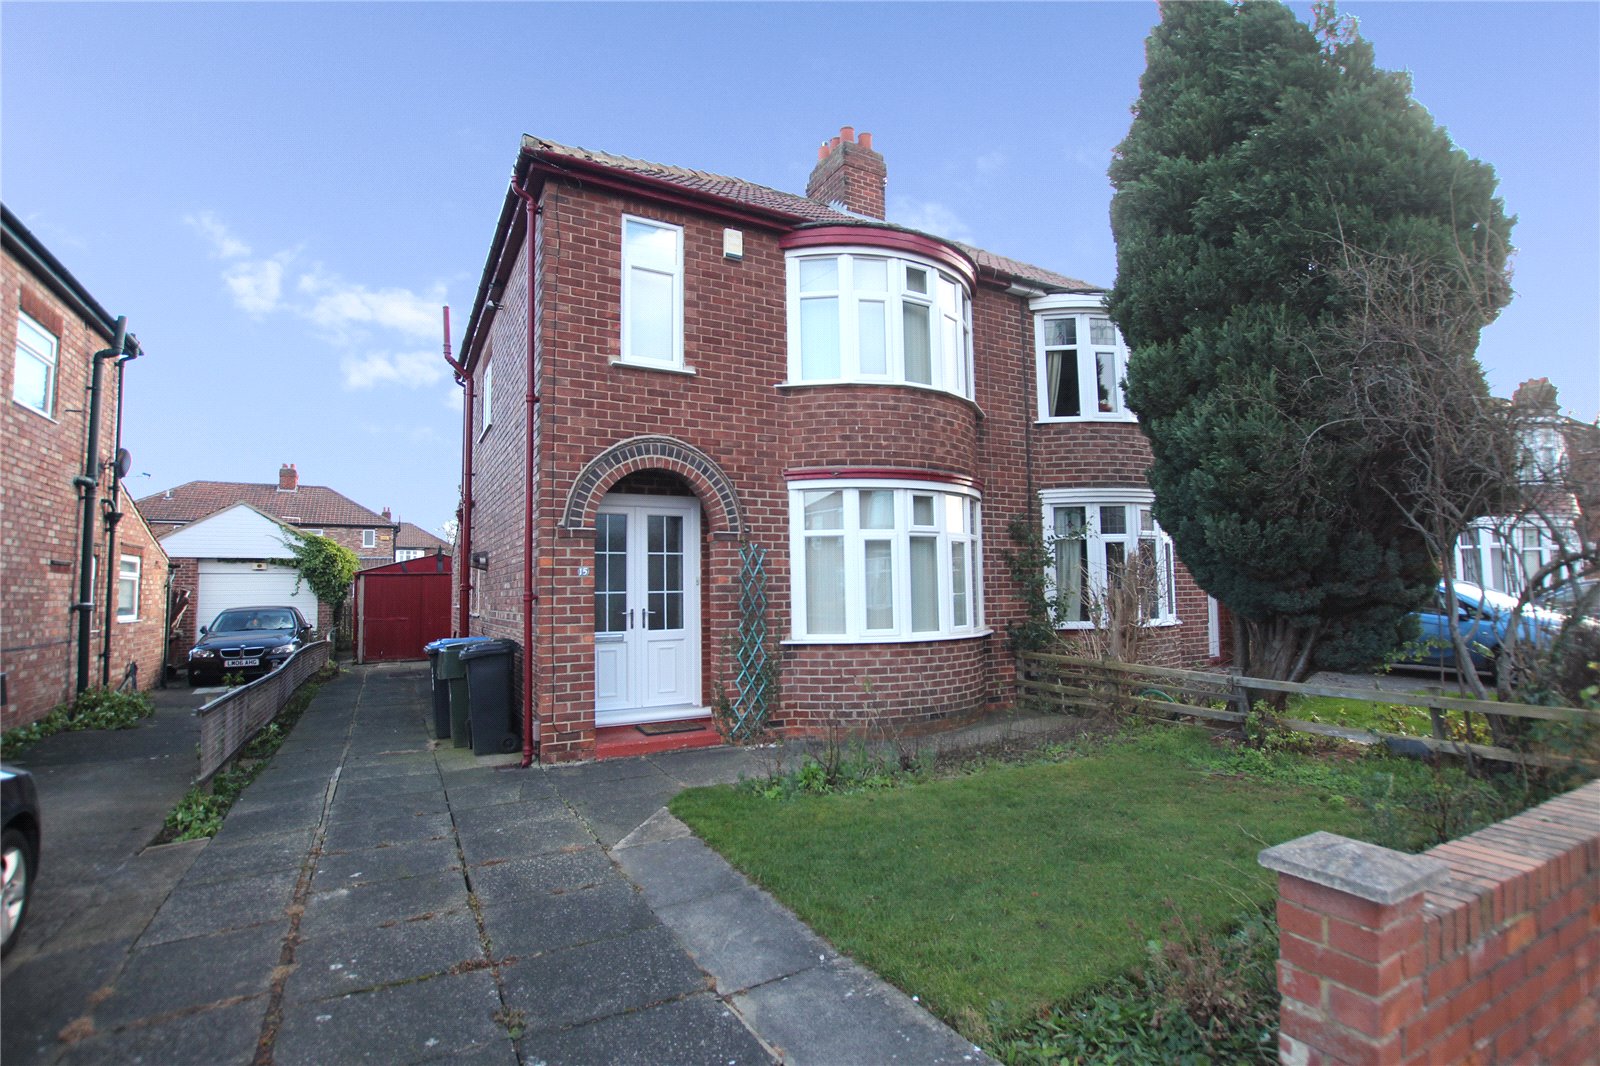 3 bed house for sale in Ennerdale Avenue, Acklam 1